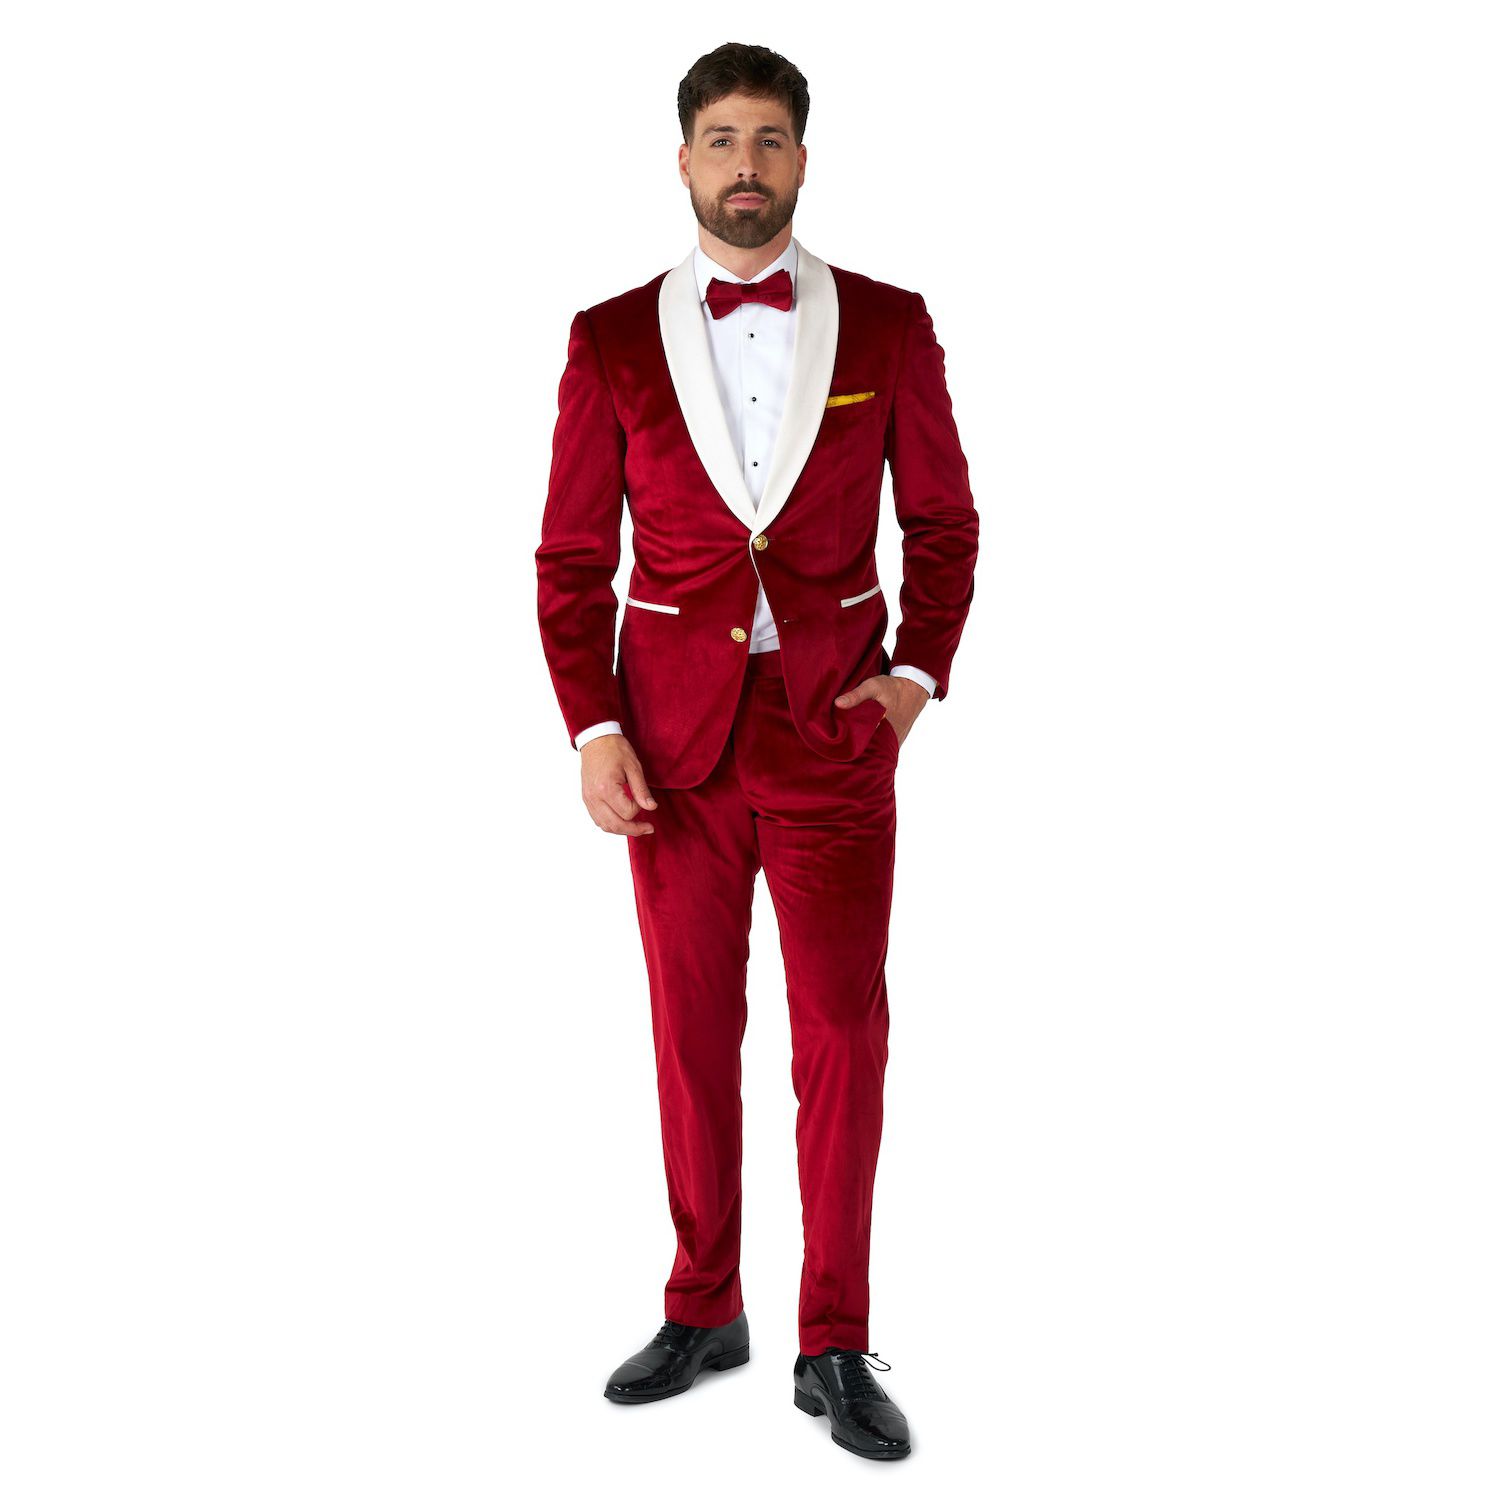 Men's Suitmeister Sequins Red Shiny Slim-Fit Christmas Party Blazer